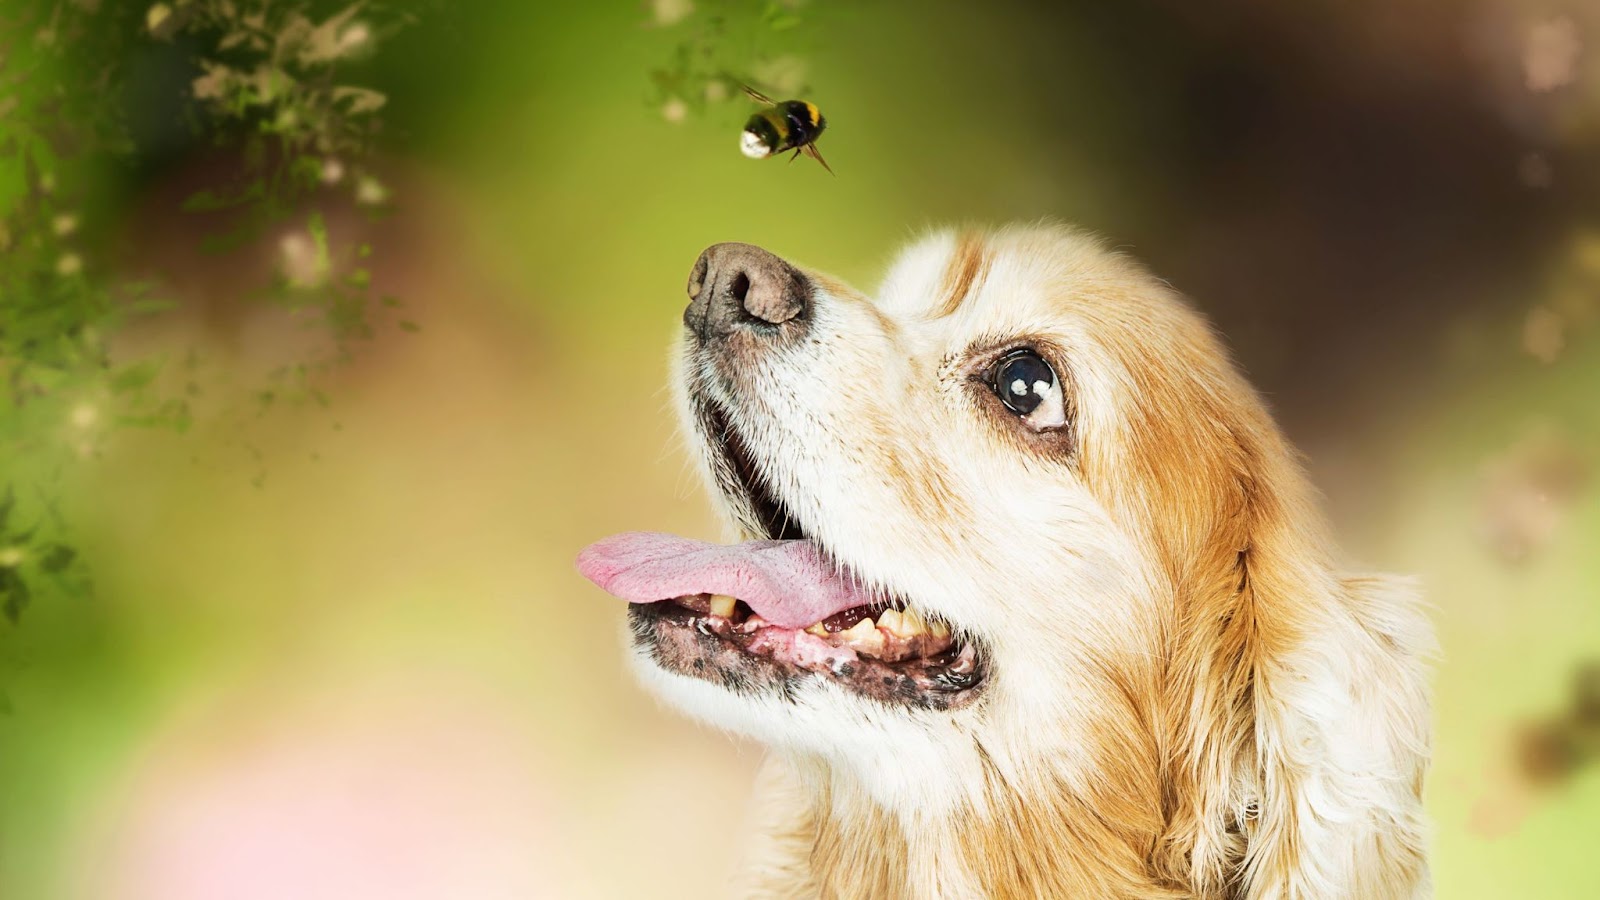 cocker spaniel dog looking at flying bee may be stung by bee